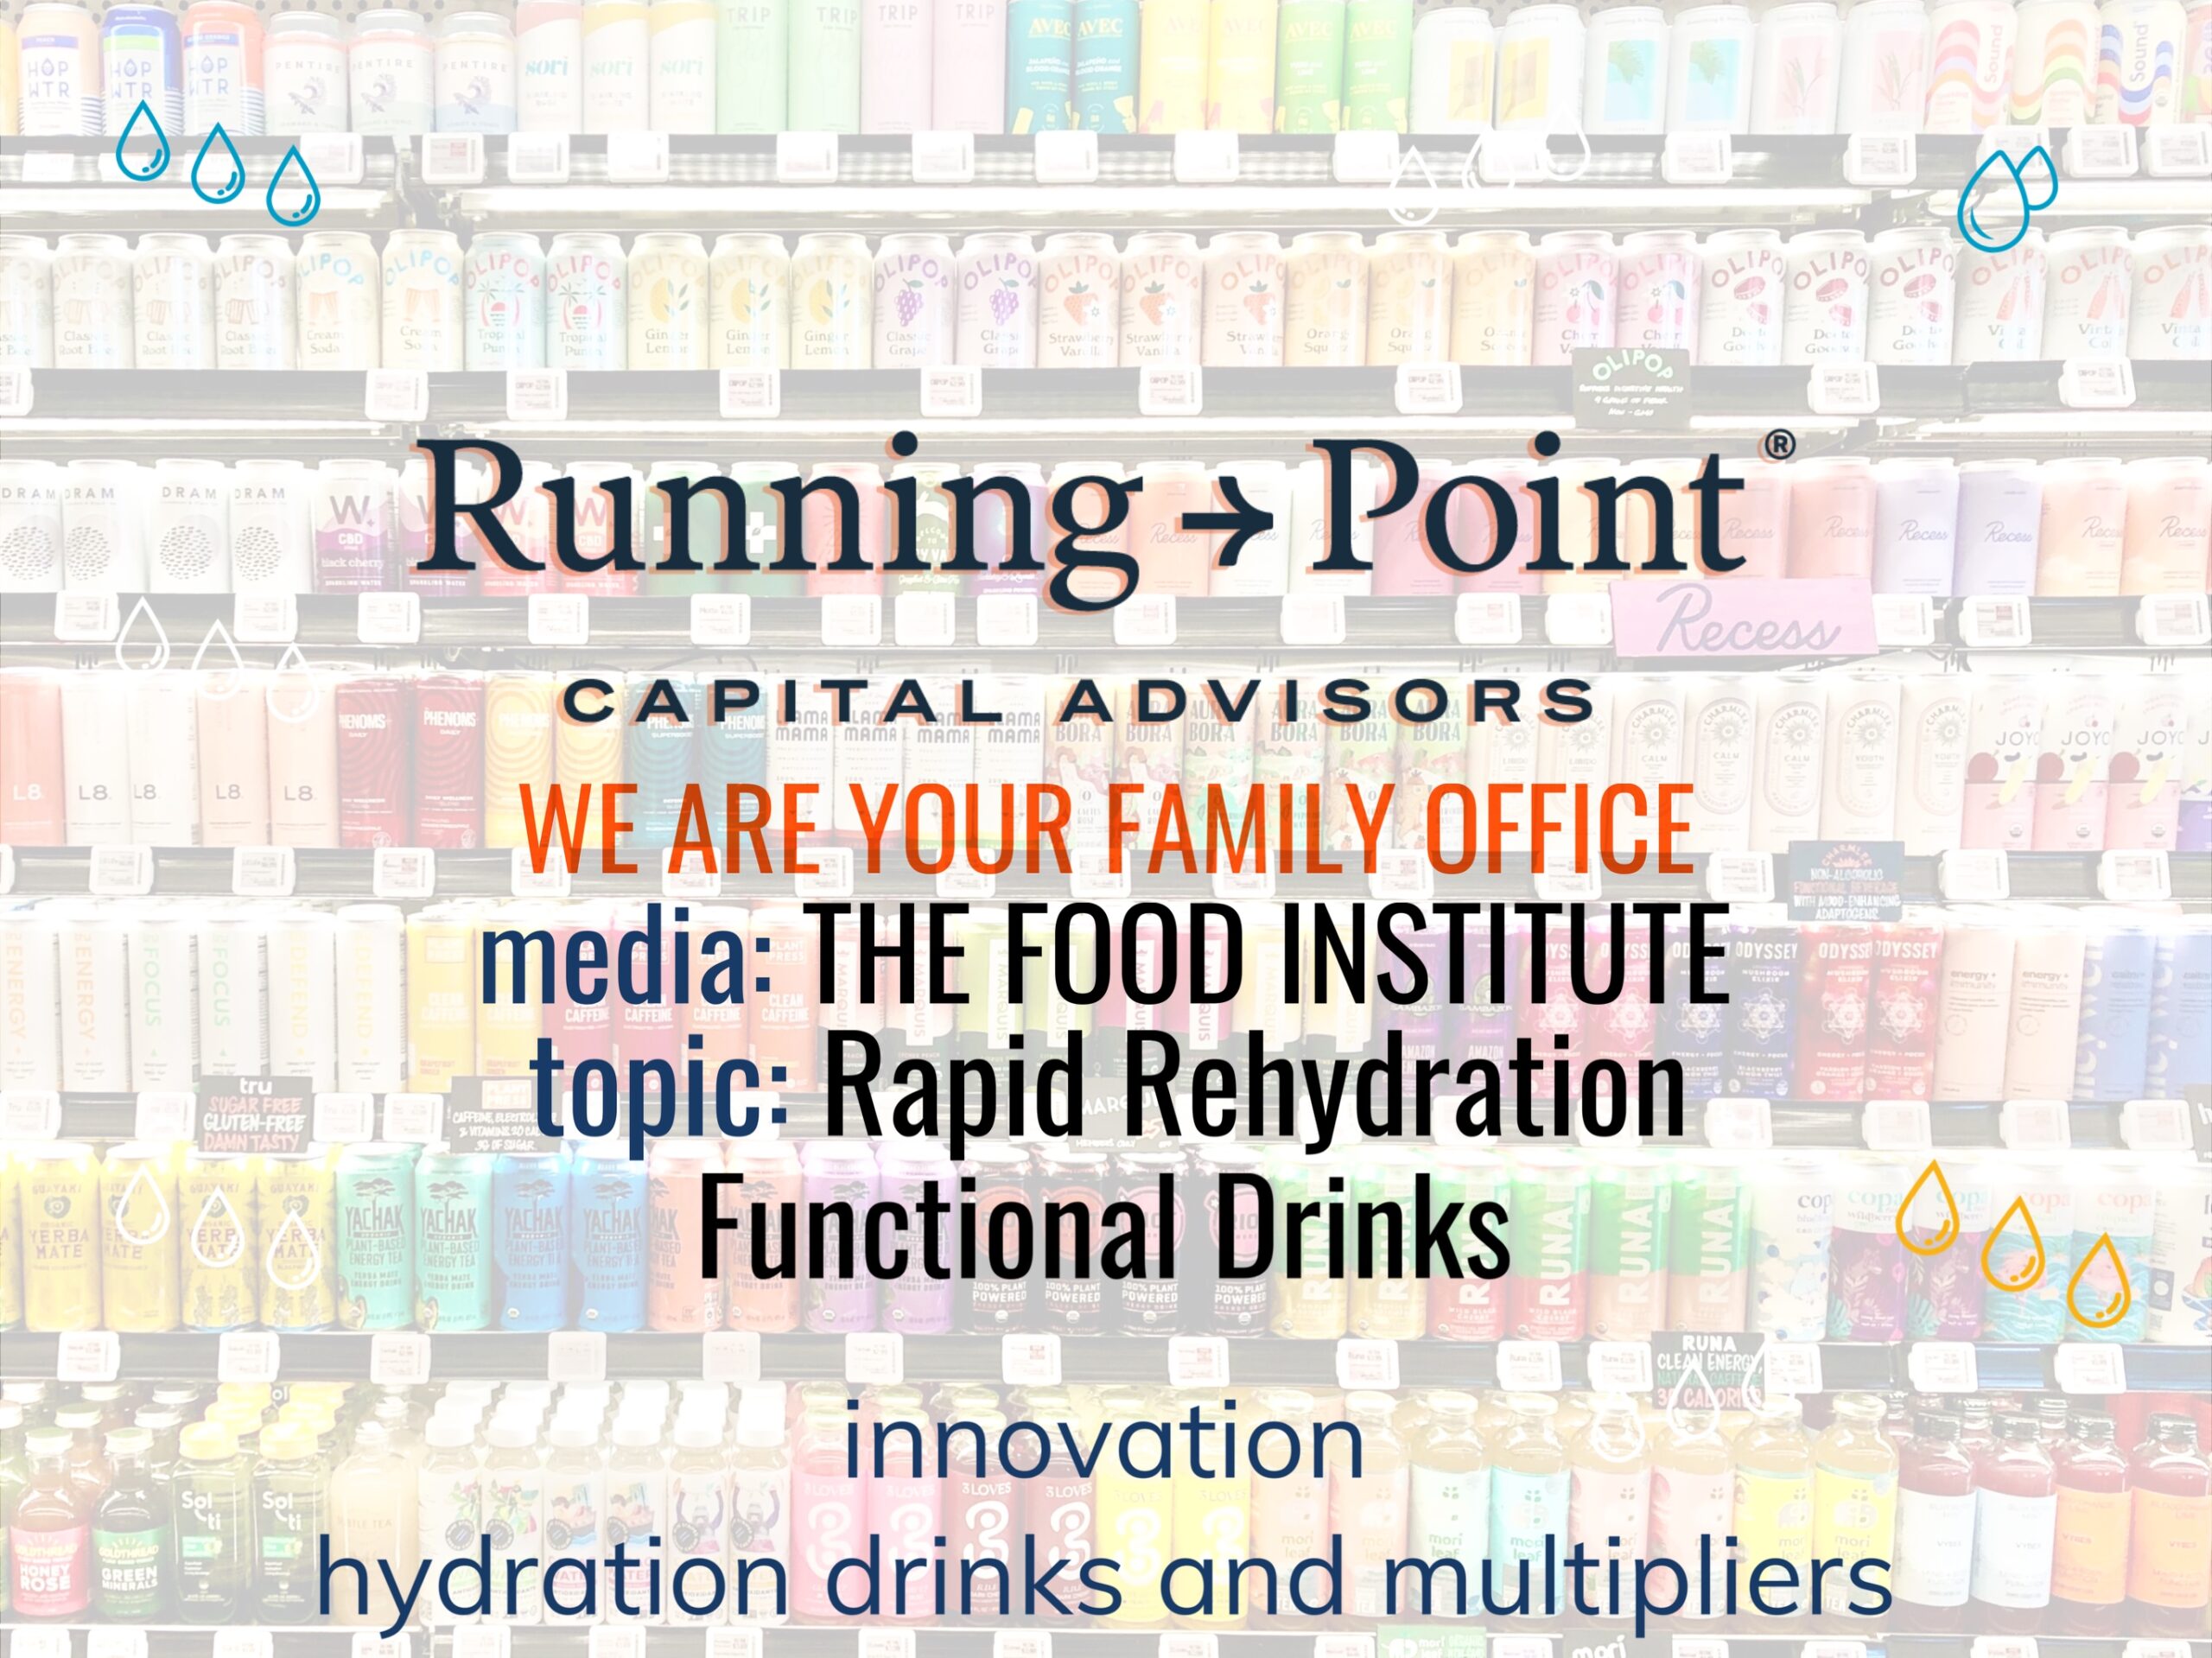 The Food Institute: Rapid Rehydration Functional Drinks